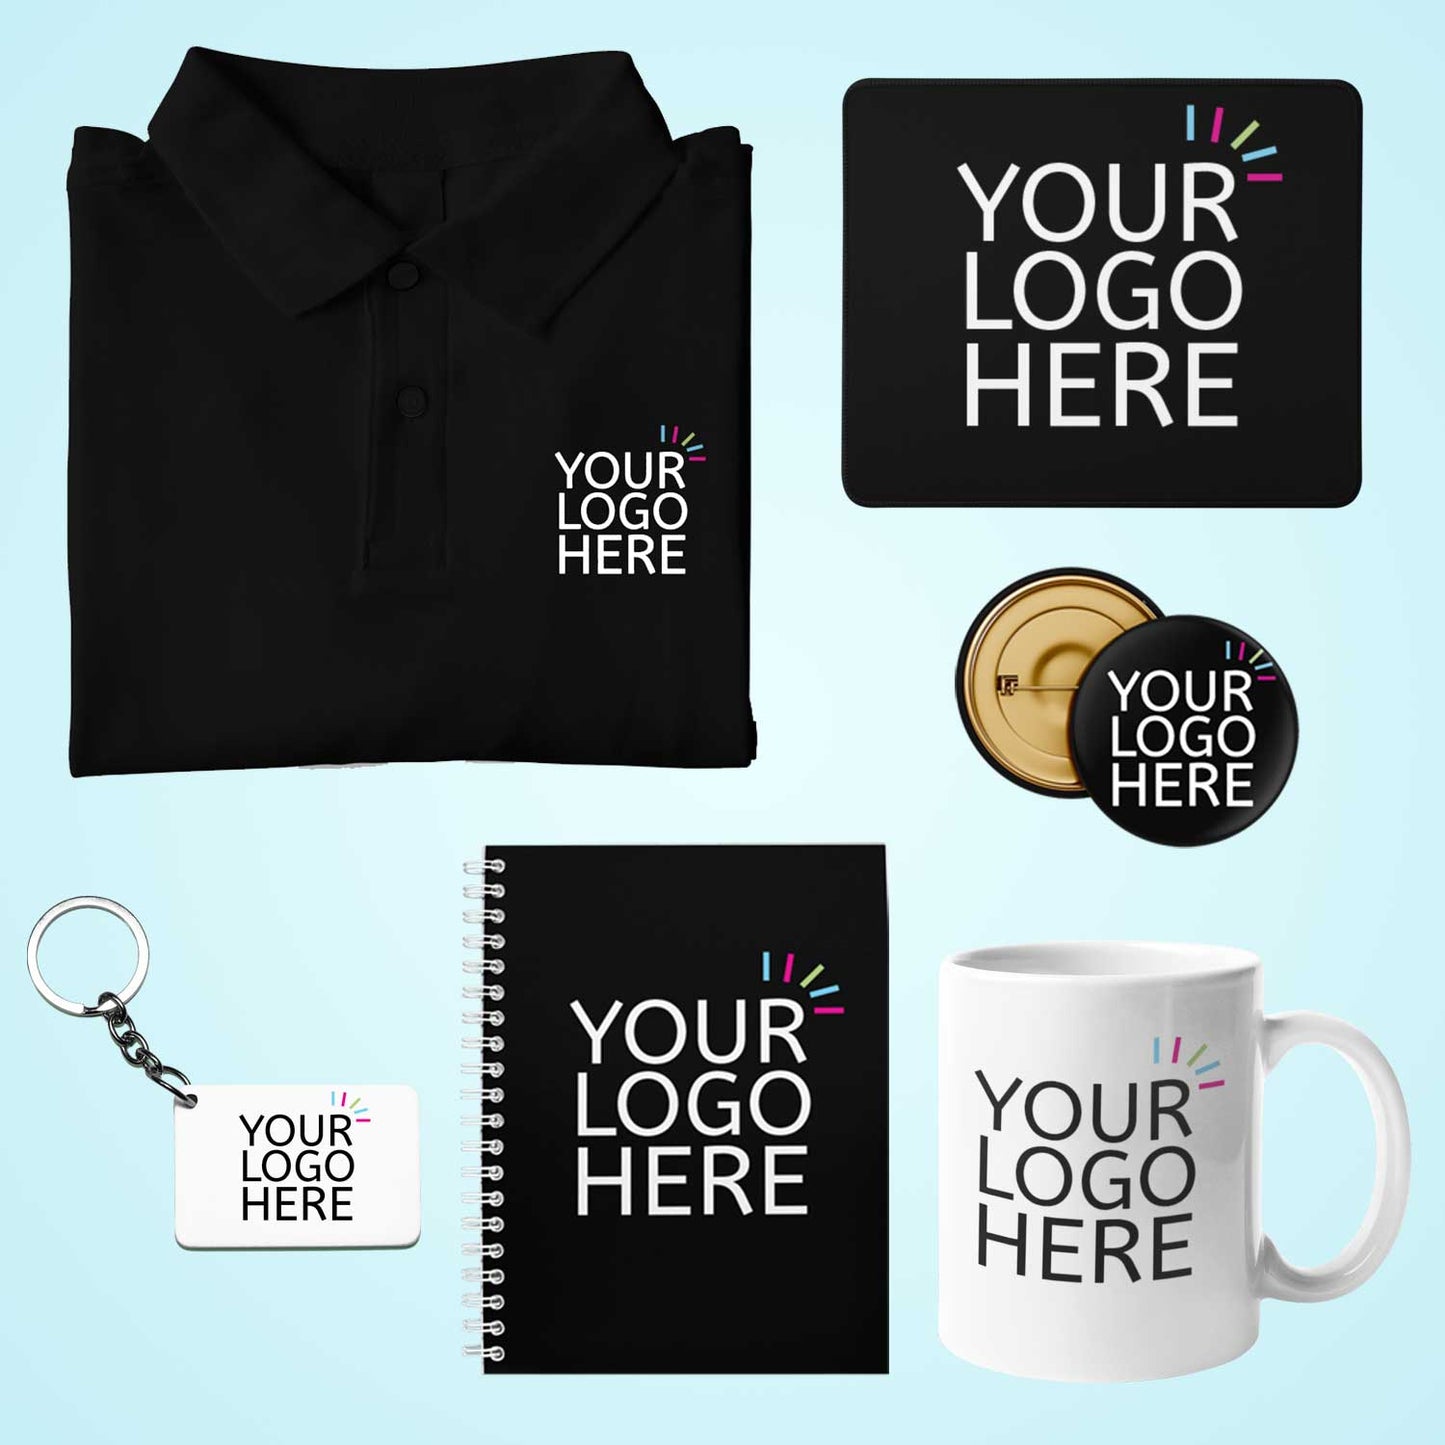 custom customized customised personalized personalised customizable customisable gifts ideas gift unique t-shirt badge mouse pad coffee mug keychain notepad notebook corporate gifting welcome kit employees clients online india products merchandise merch logo design shirts combo